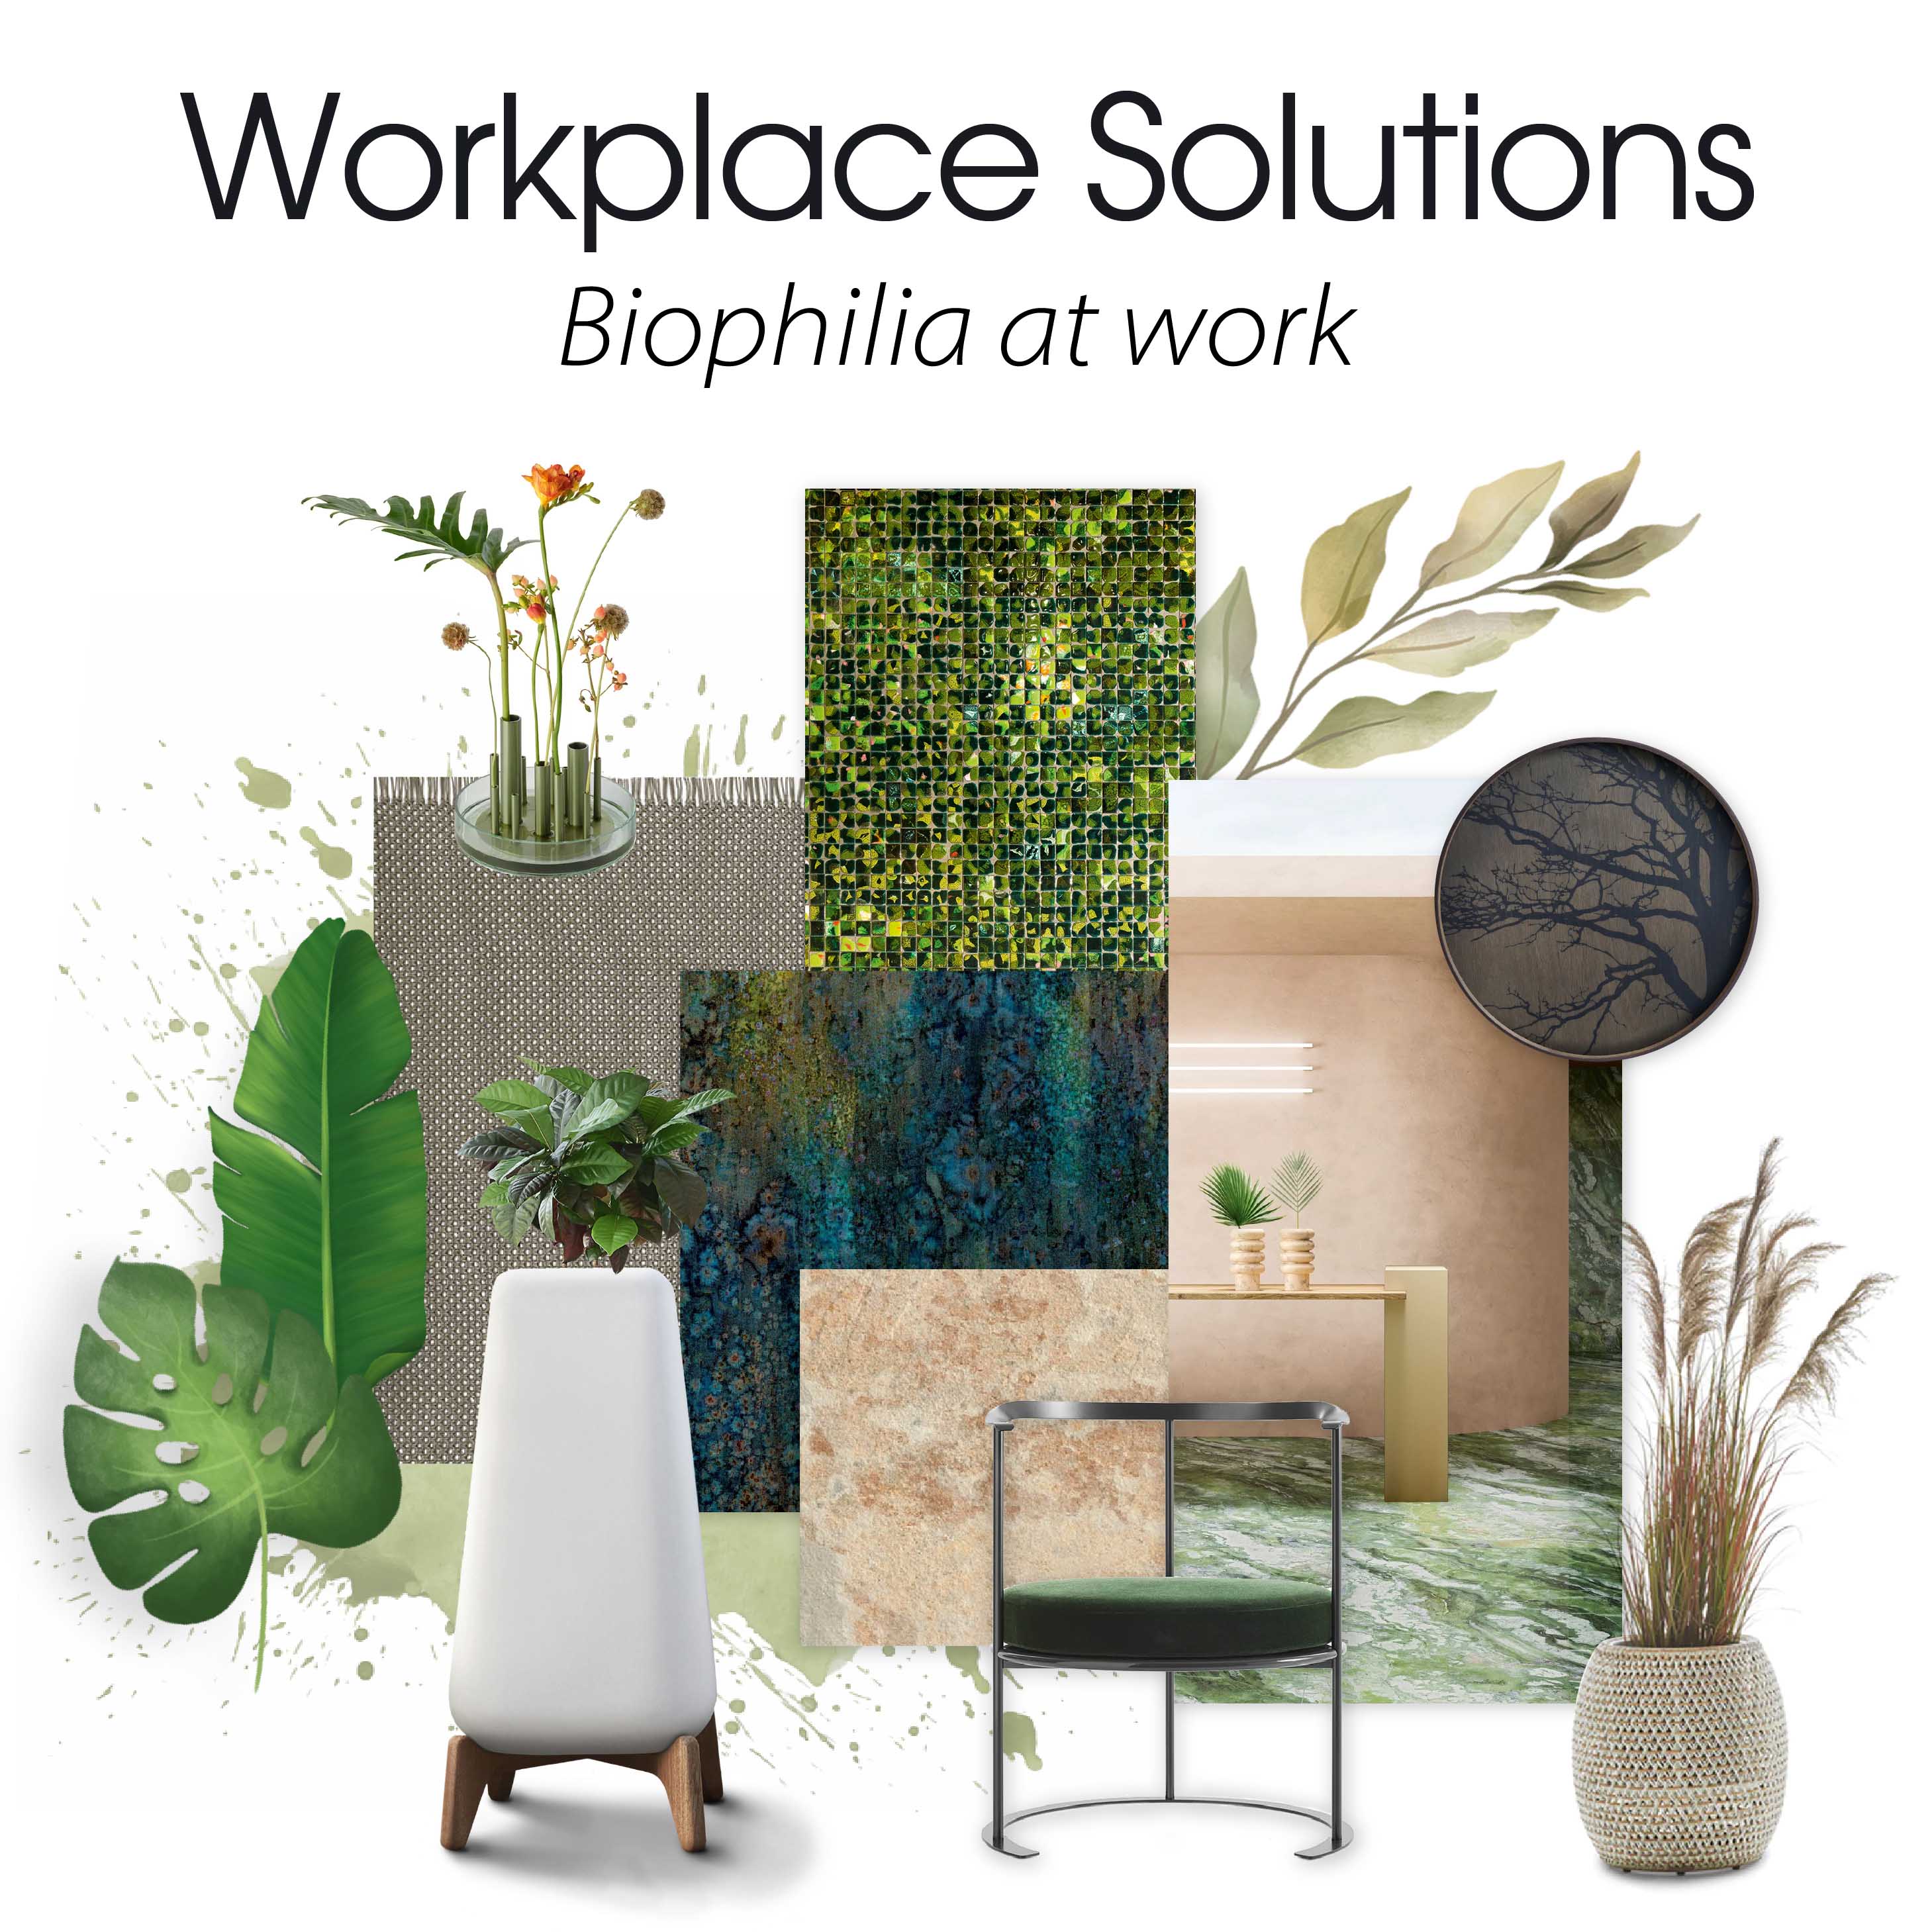 Workplace Solutions | Biophilia at work